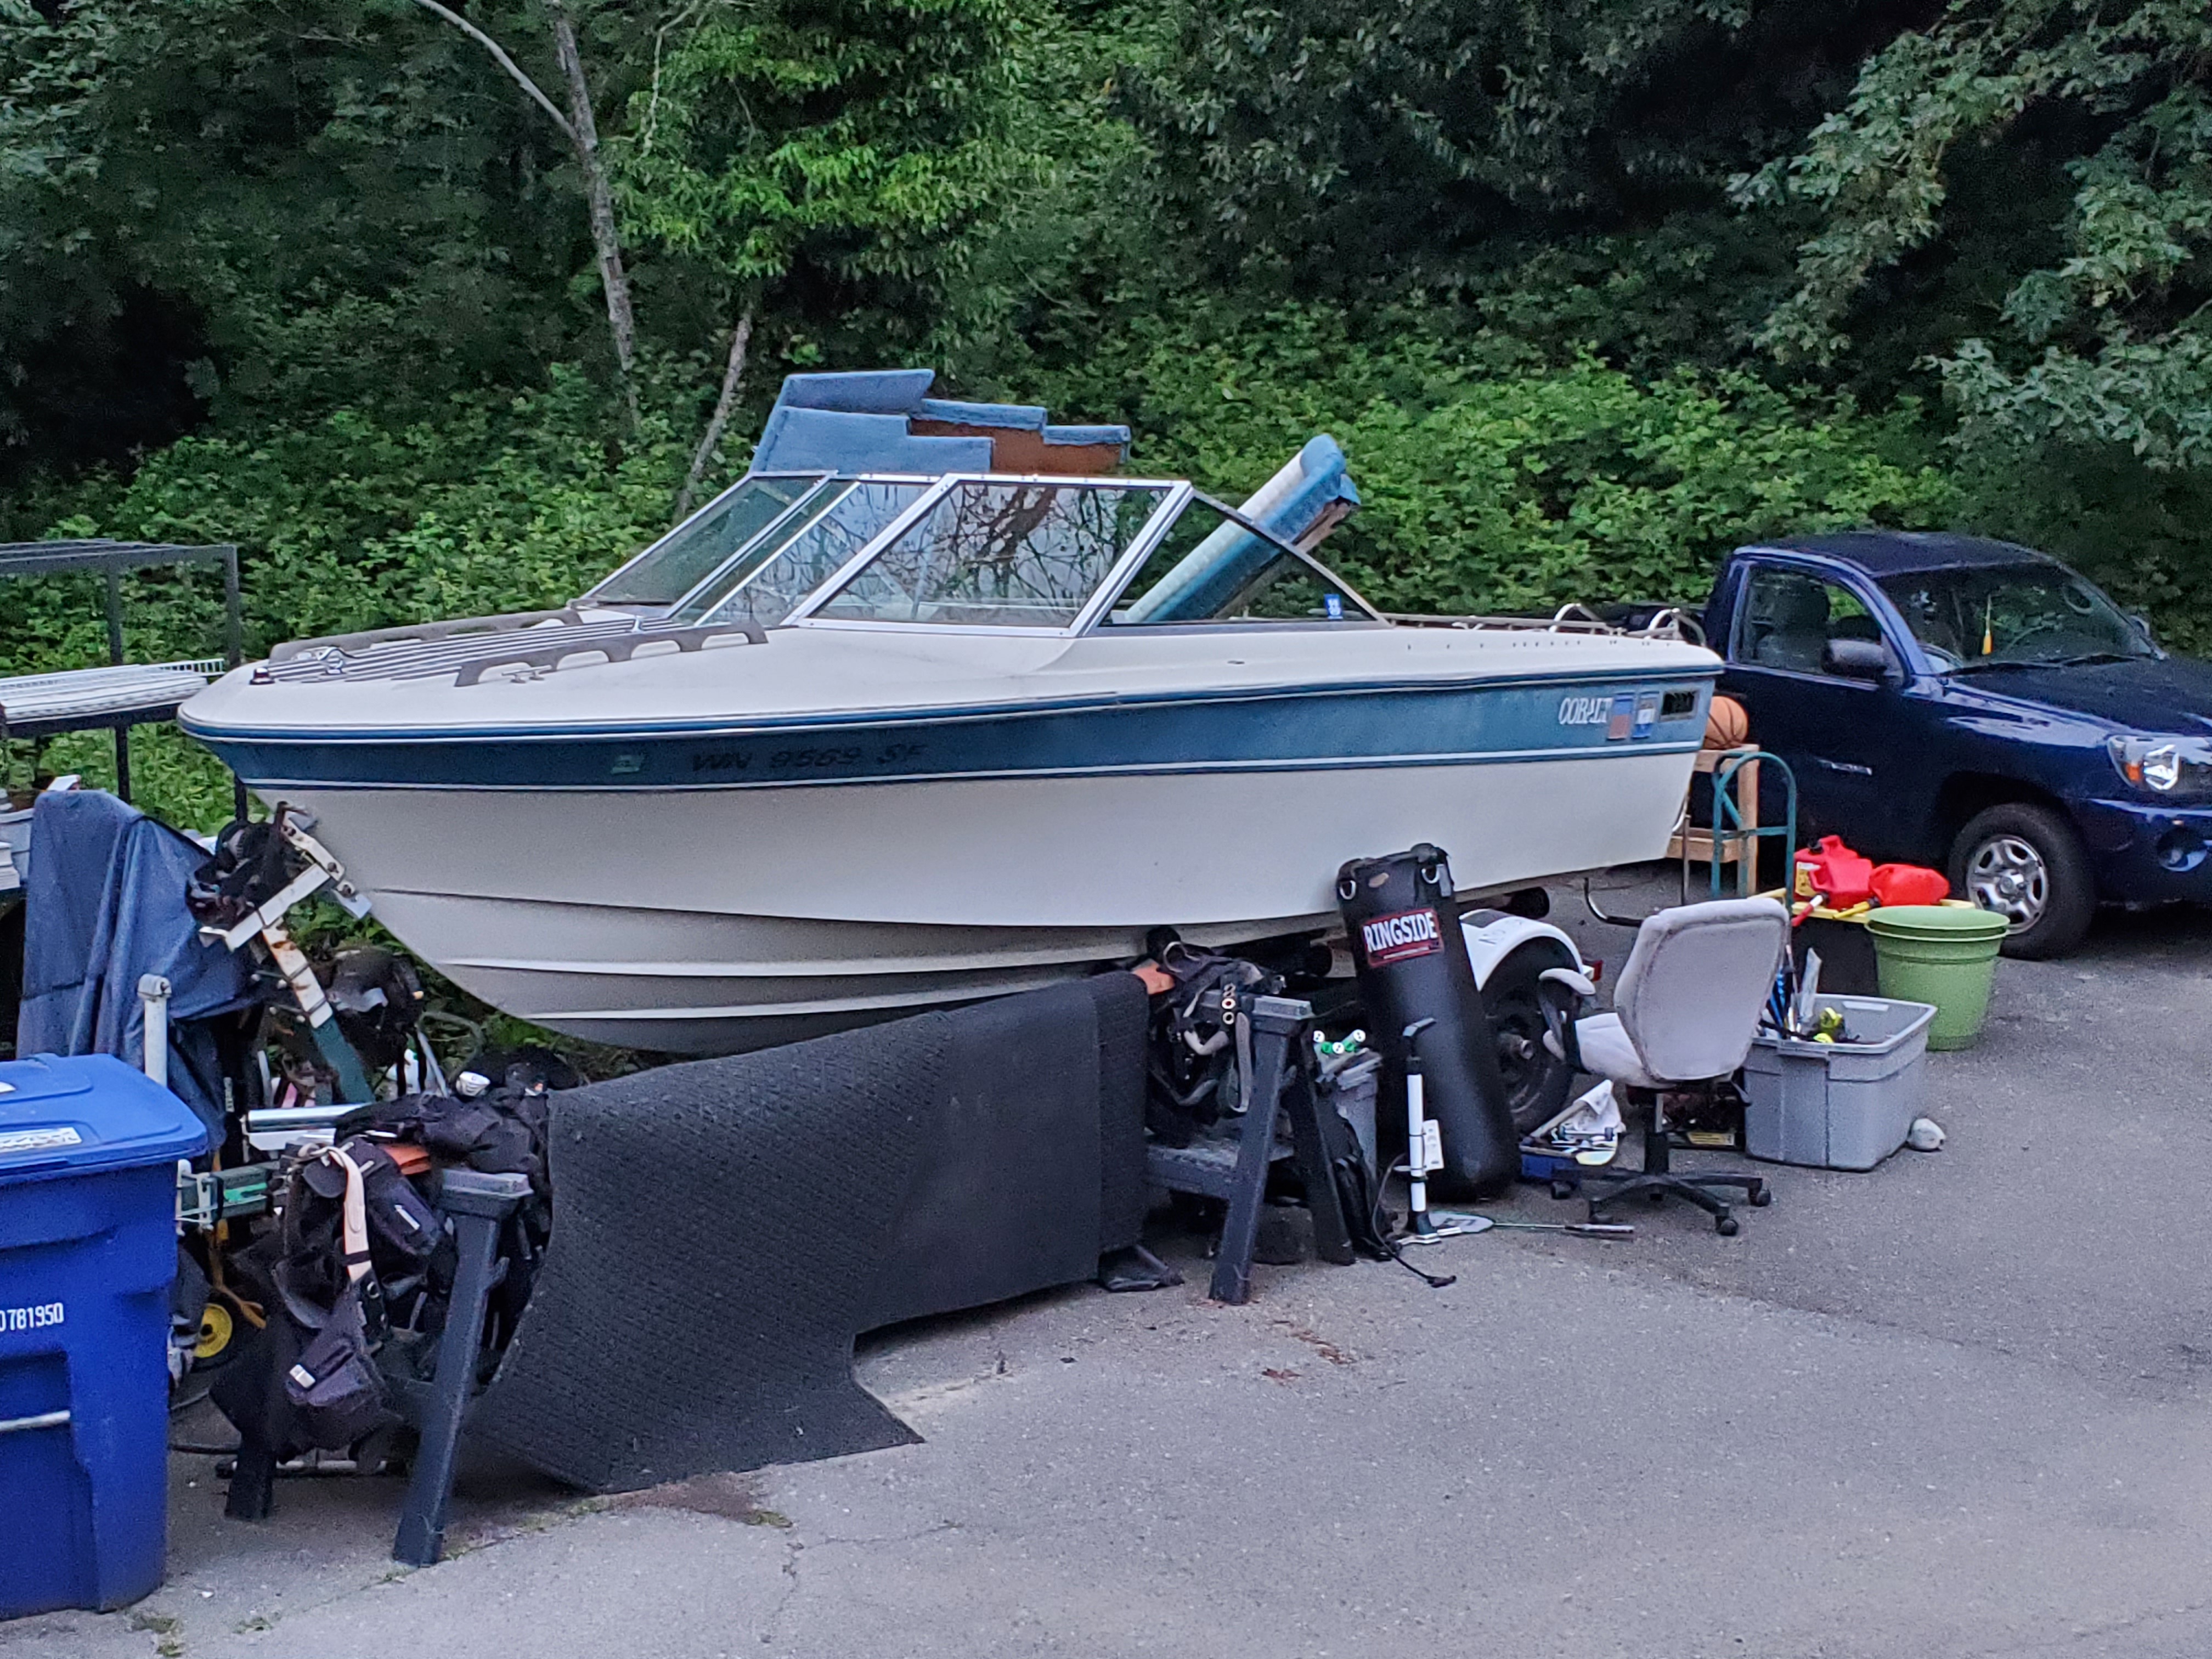 1978 19 foot Cobalt FGE Power boat for sale in Burien, WA - image 1 